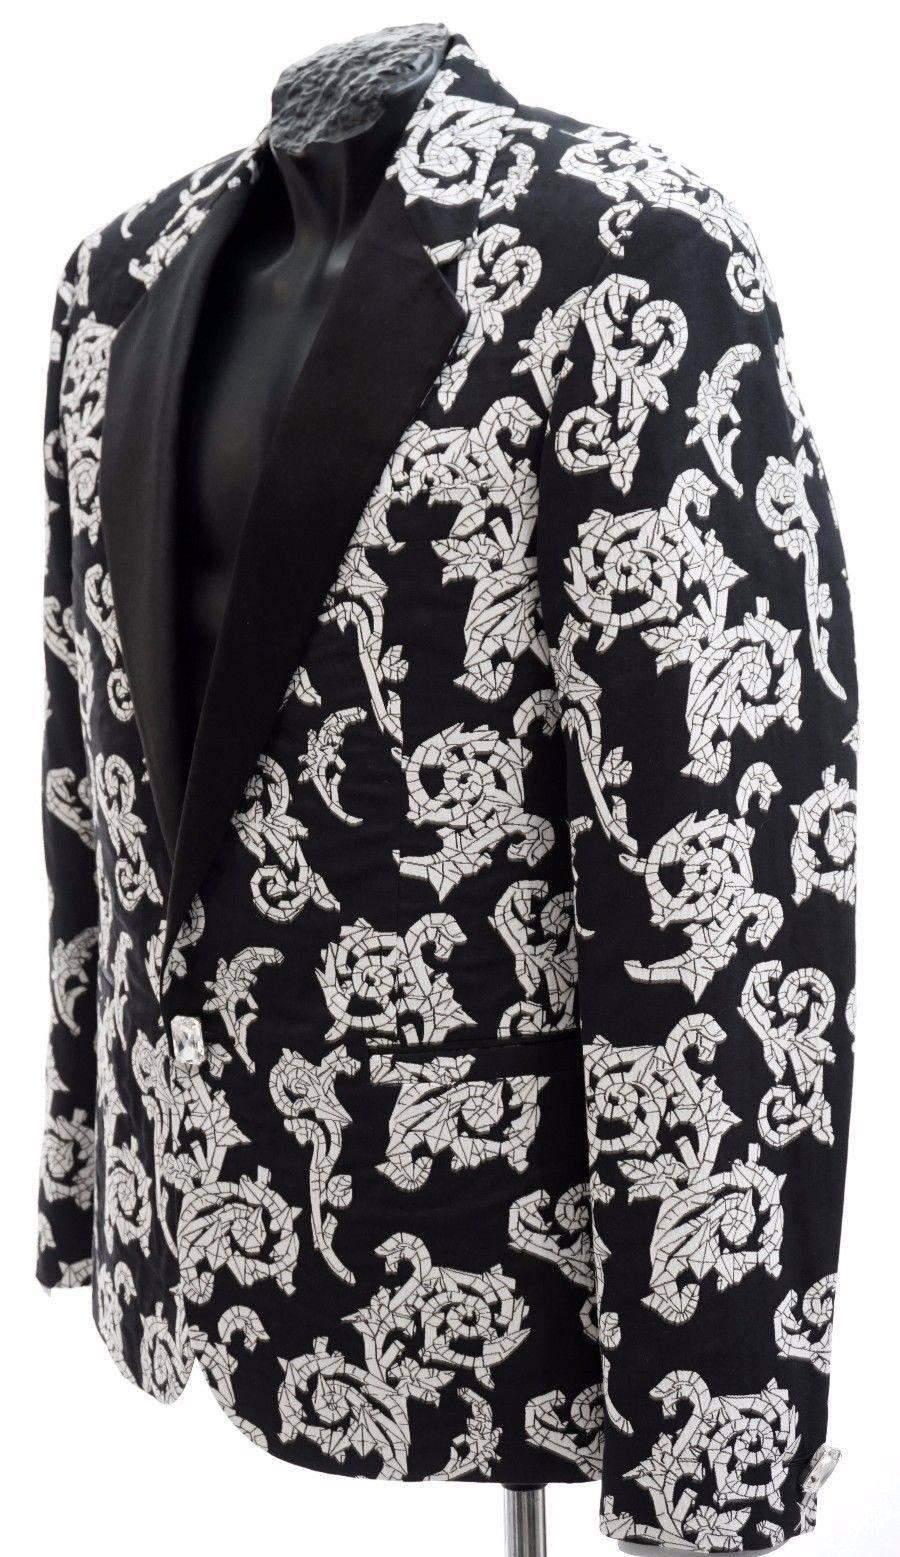 VERSACE TAILOR MADE TUXEDO BLAZER JACKET with CRYSTAL BUTTONS for MEN